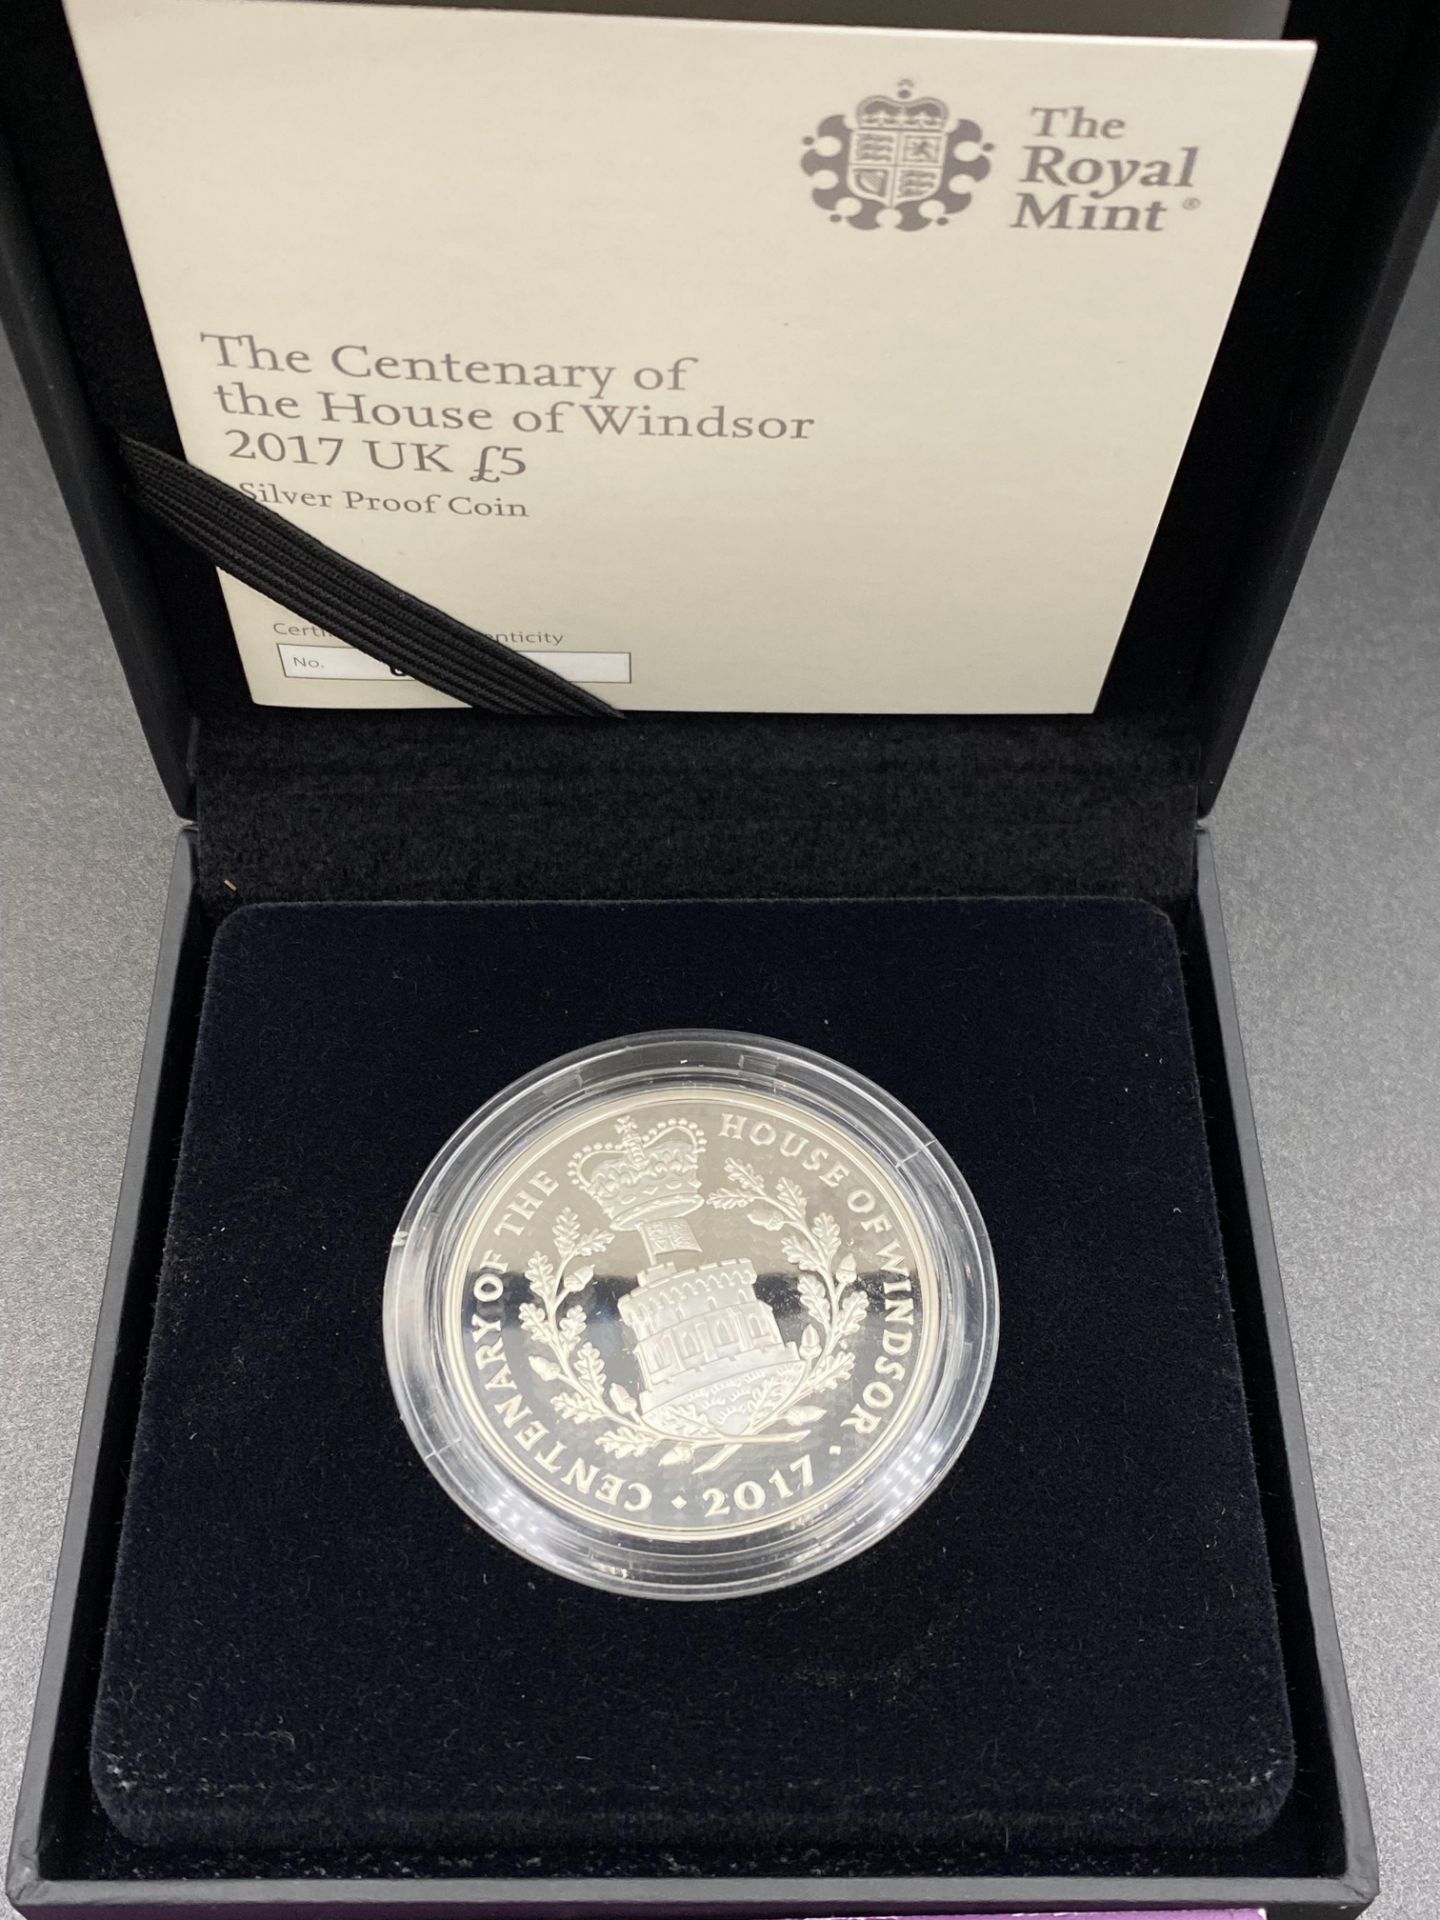 Royal Mint Centenary of the House of Windsor £5 silver proof coin